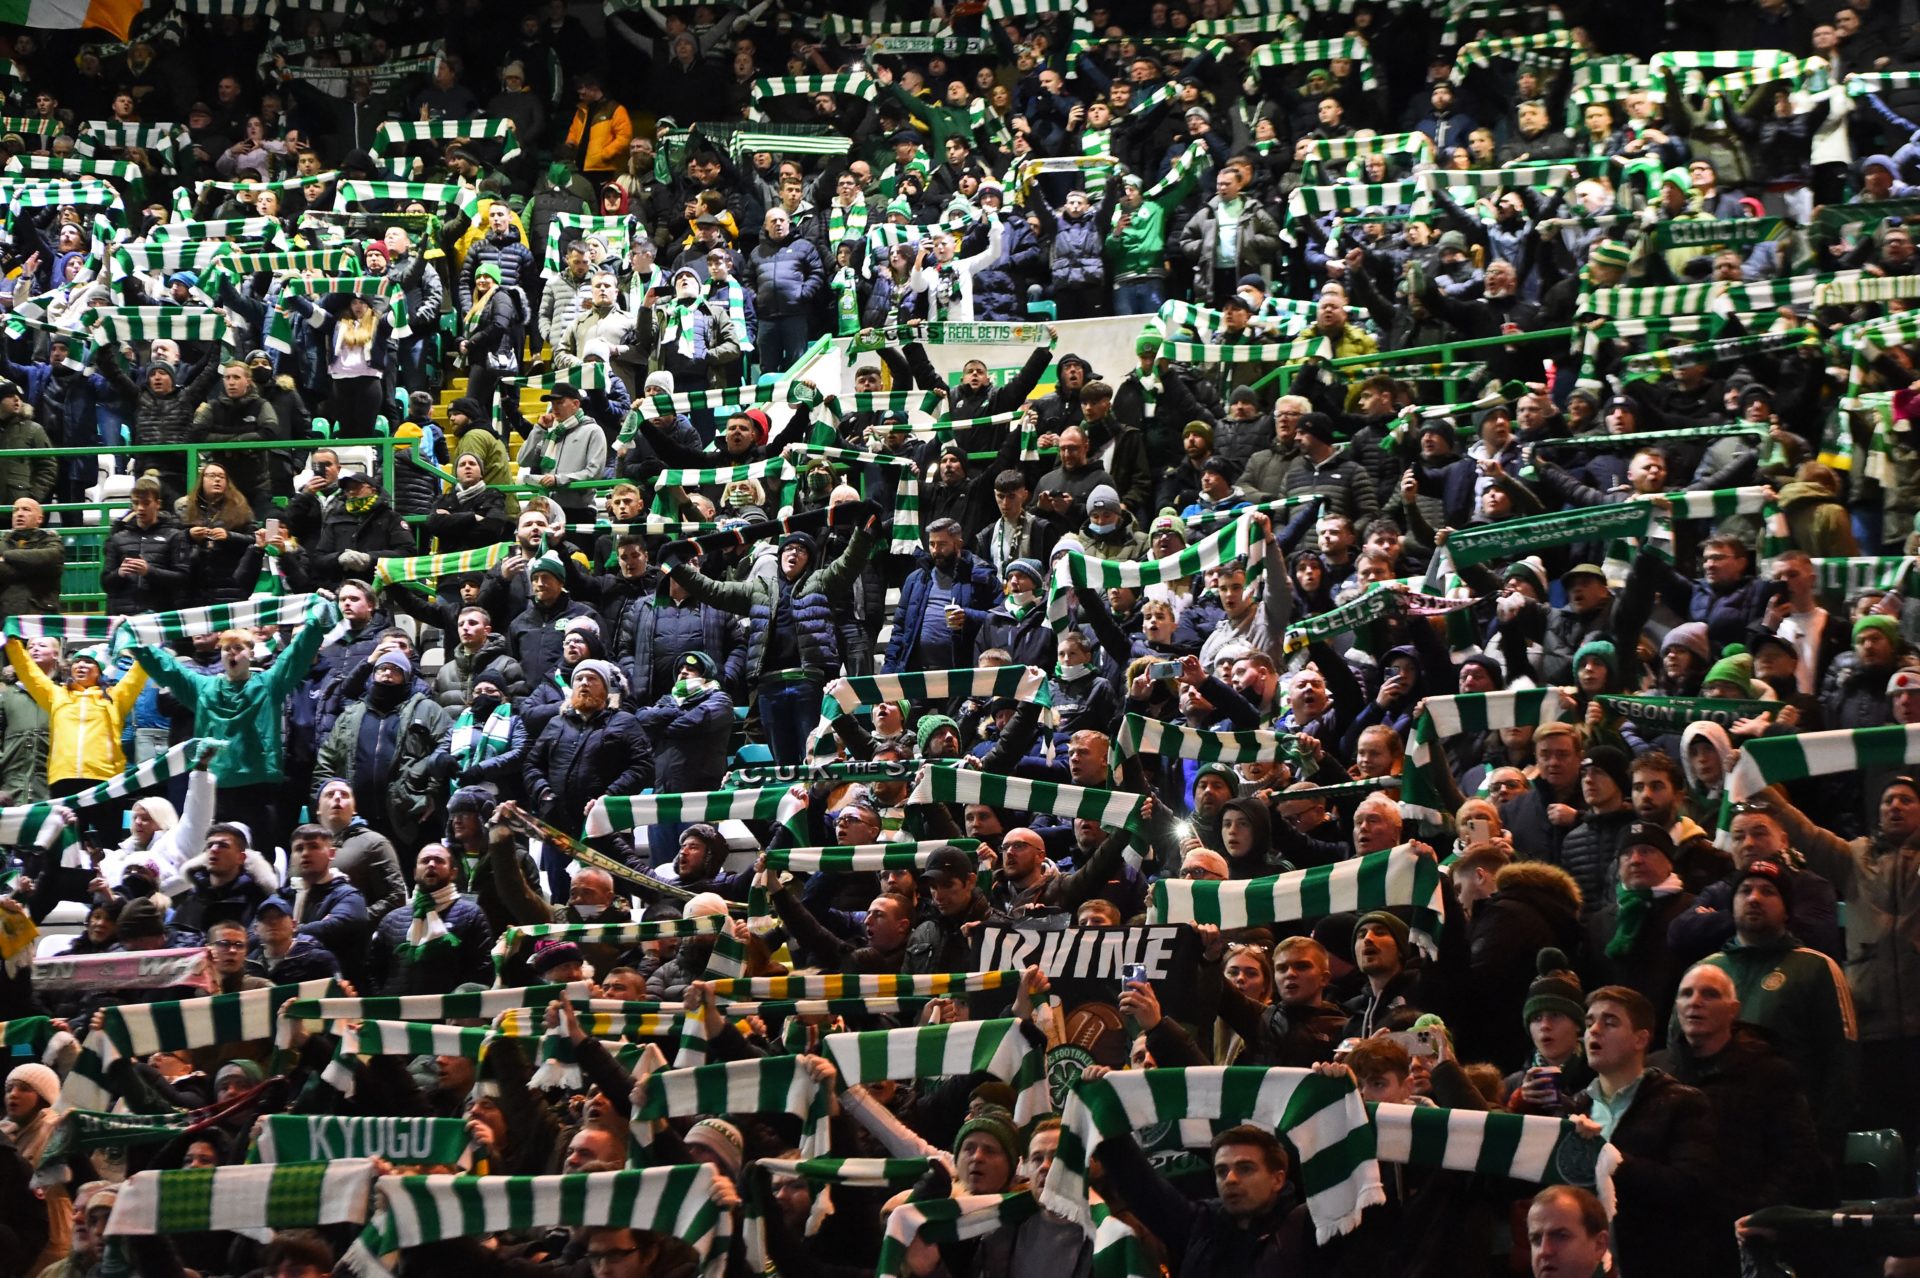 Celtic supporters